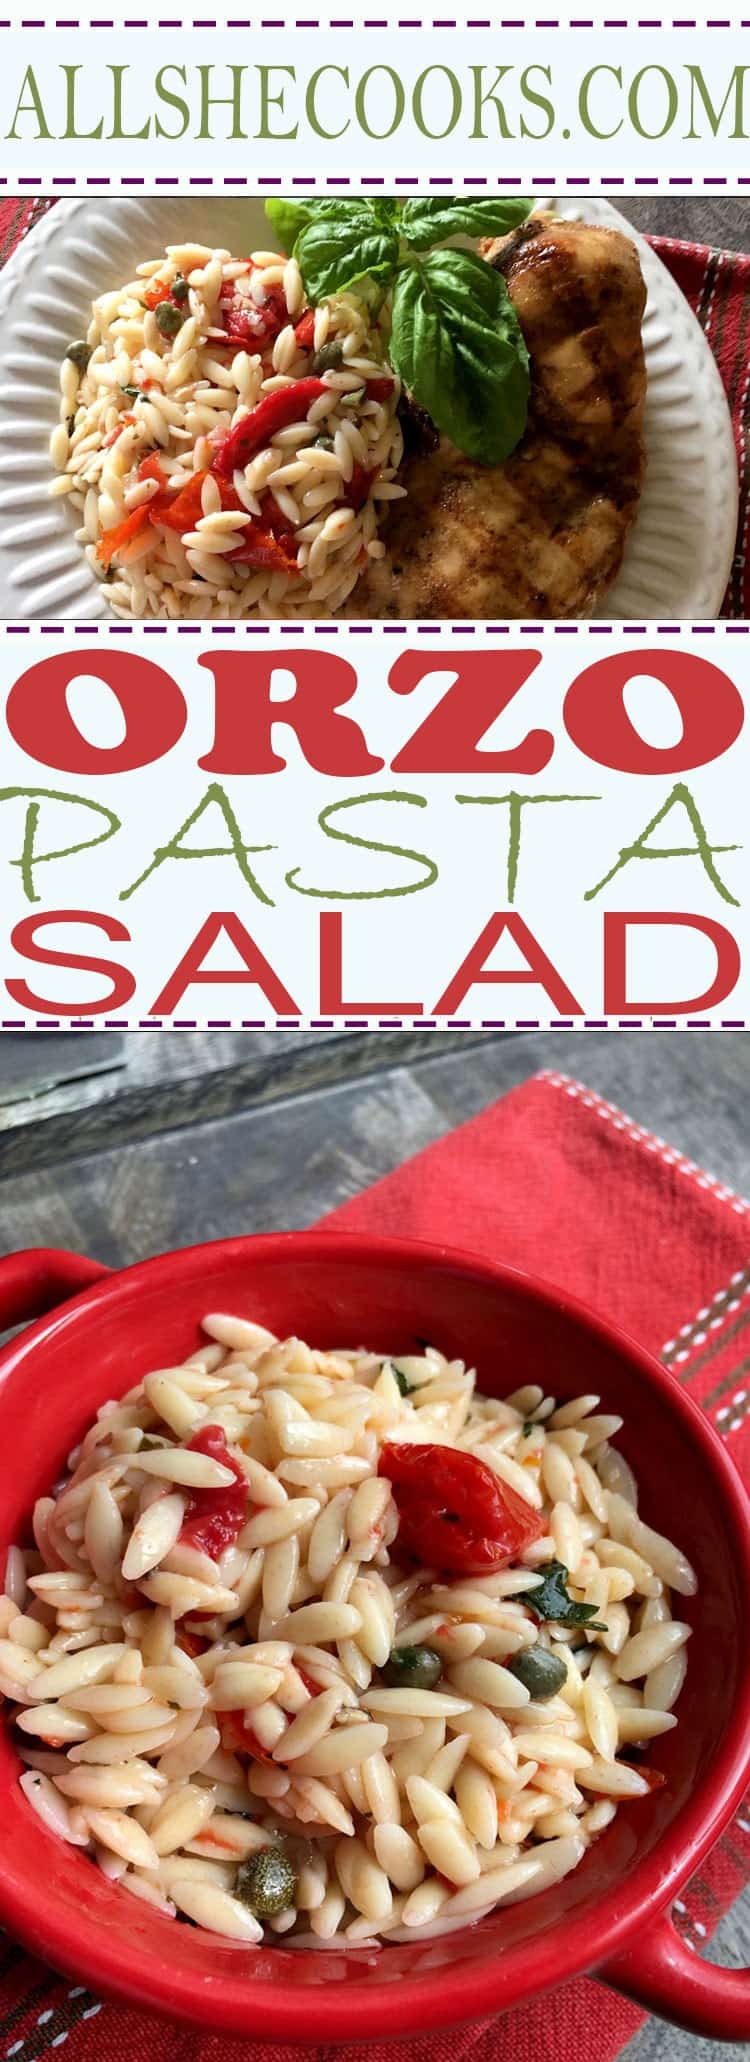 Orzo Salad with Tomatoes and Capers - Food to Bring to a Party This chilled pasta salad is a great way to keep cool on a hot day. This delicious side dish tastes even better after the flavors have a chance to mingle, so make it a day or two in advance to take to your next picnic or casual get-together.